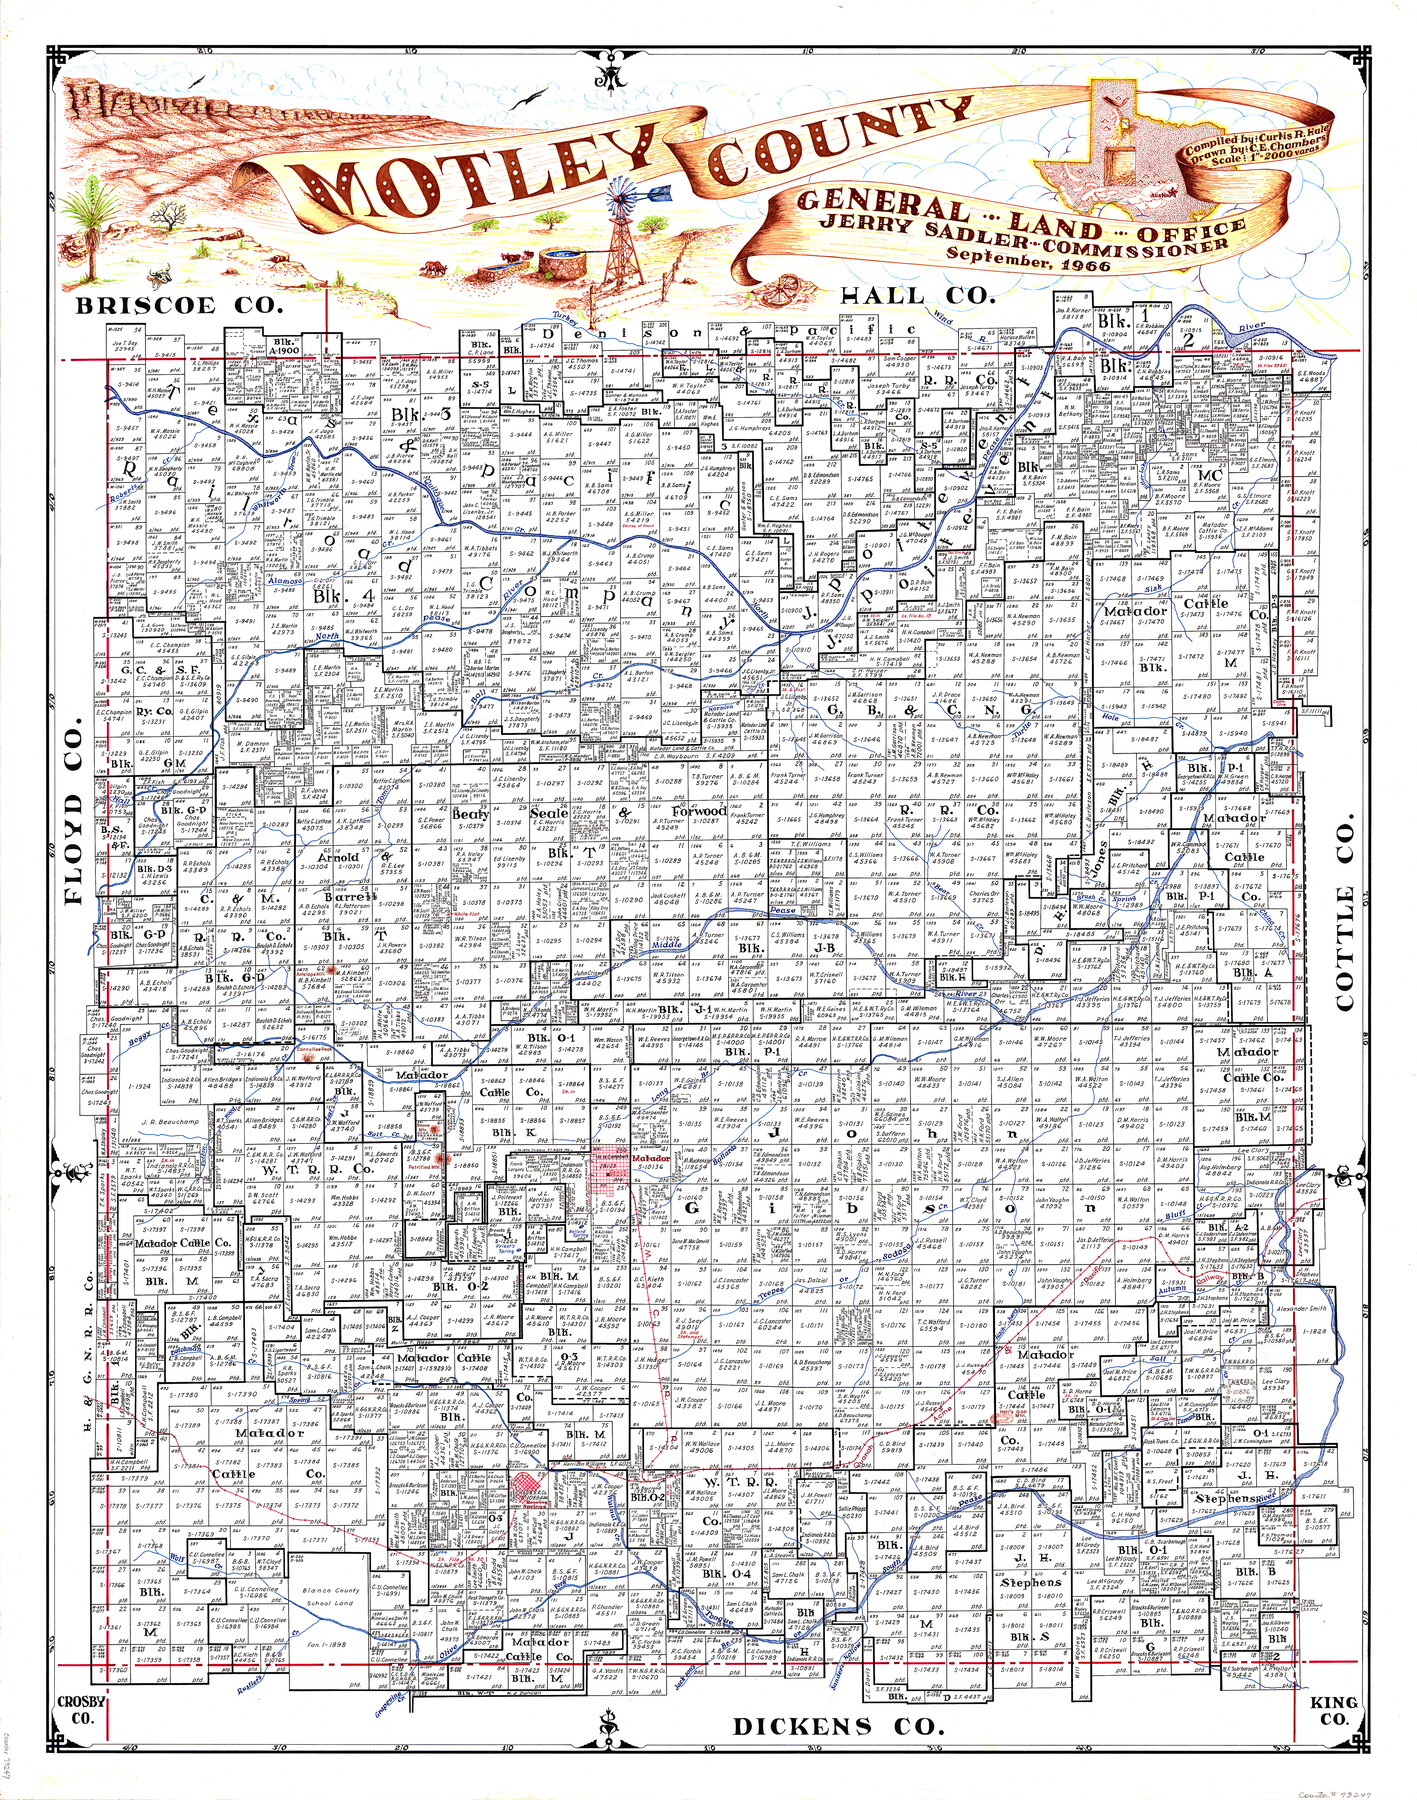 73247, Motley County, General Map Collection